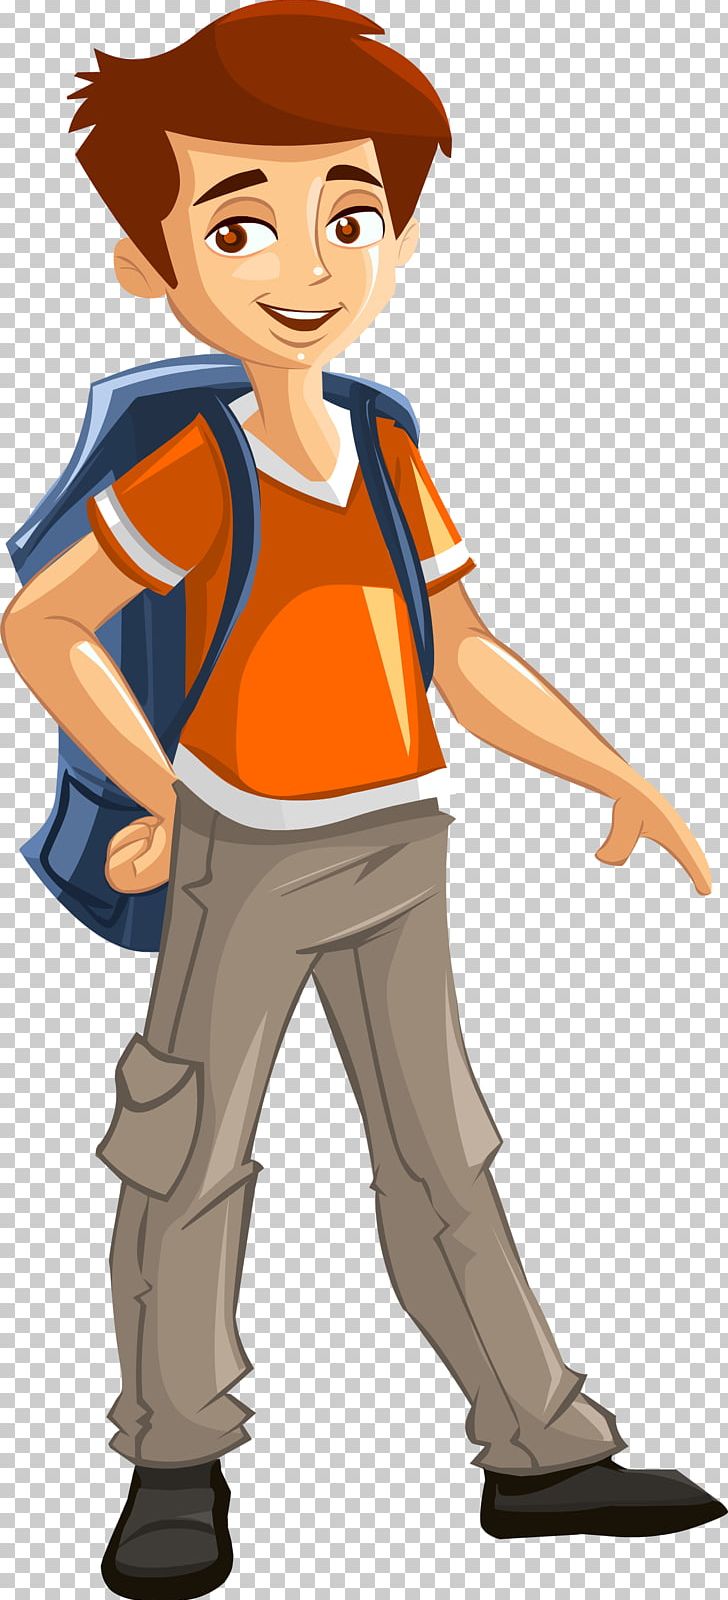 Graphic Design Character Cartoon PNG, Clipart, Art, Boy, Boys, Cartoon, Character Free PNG Download